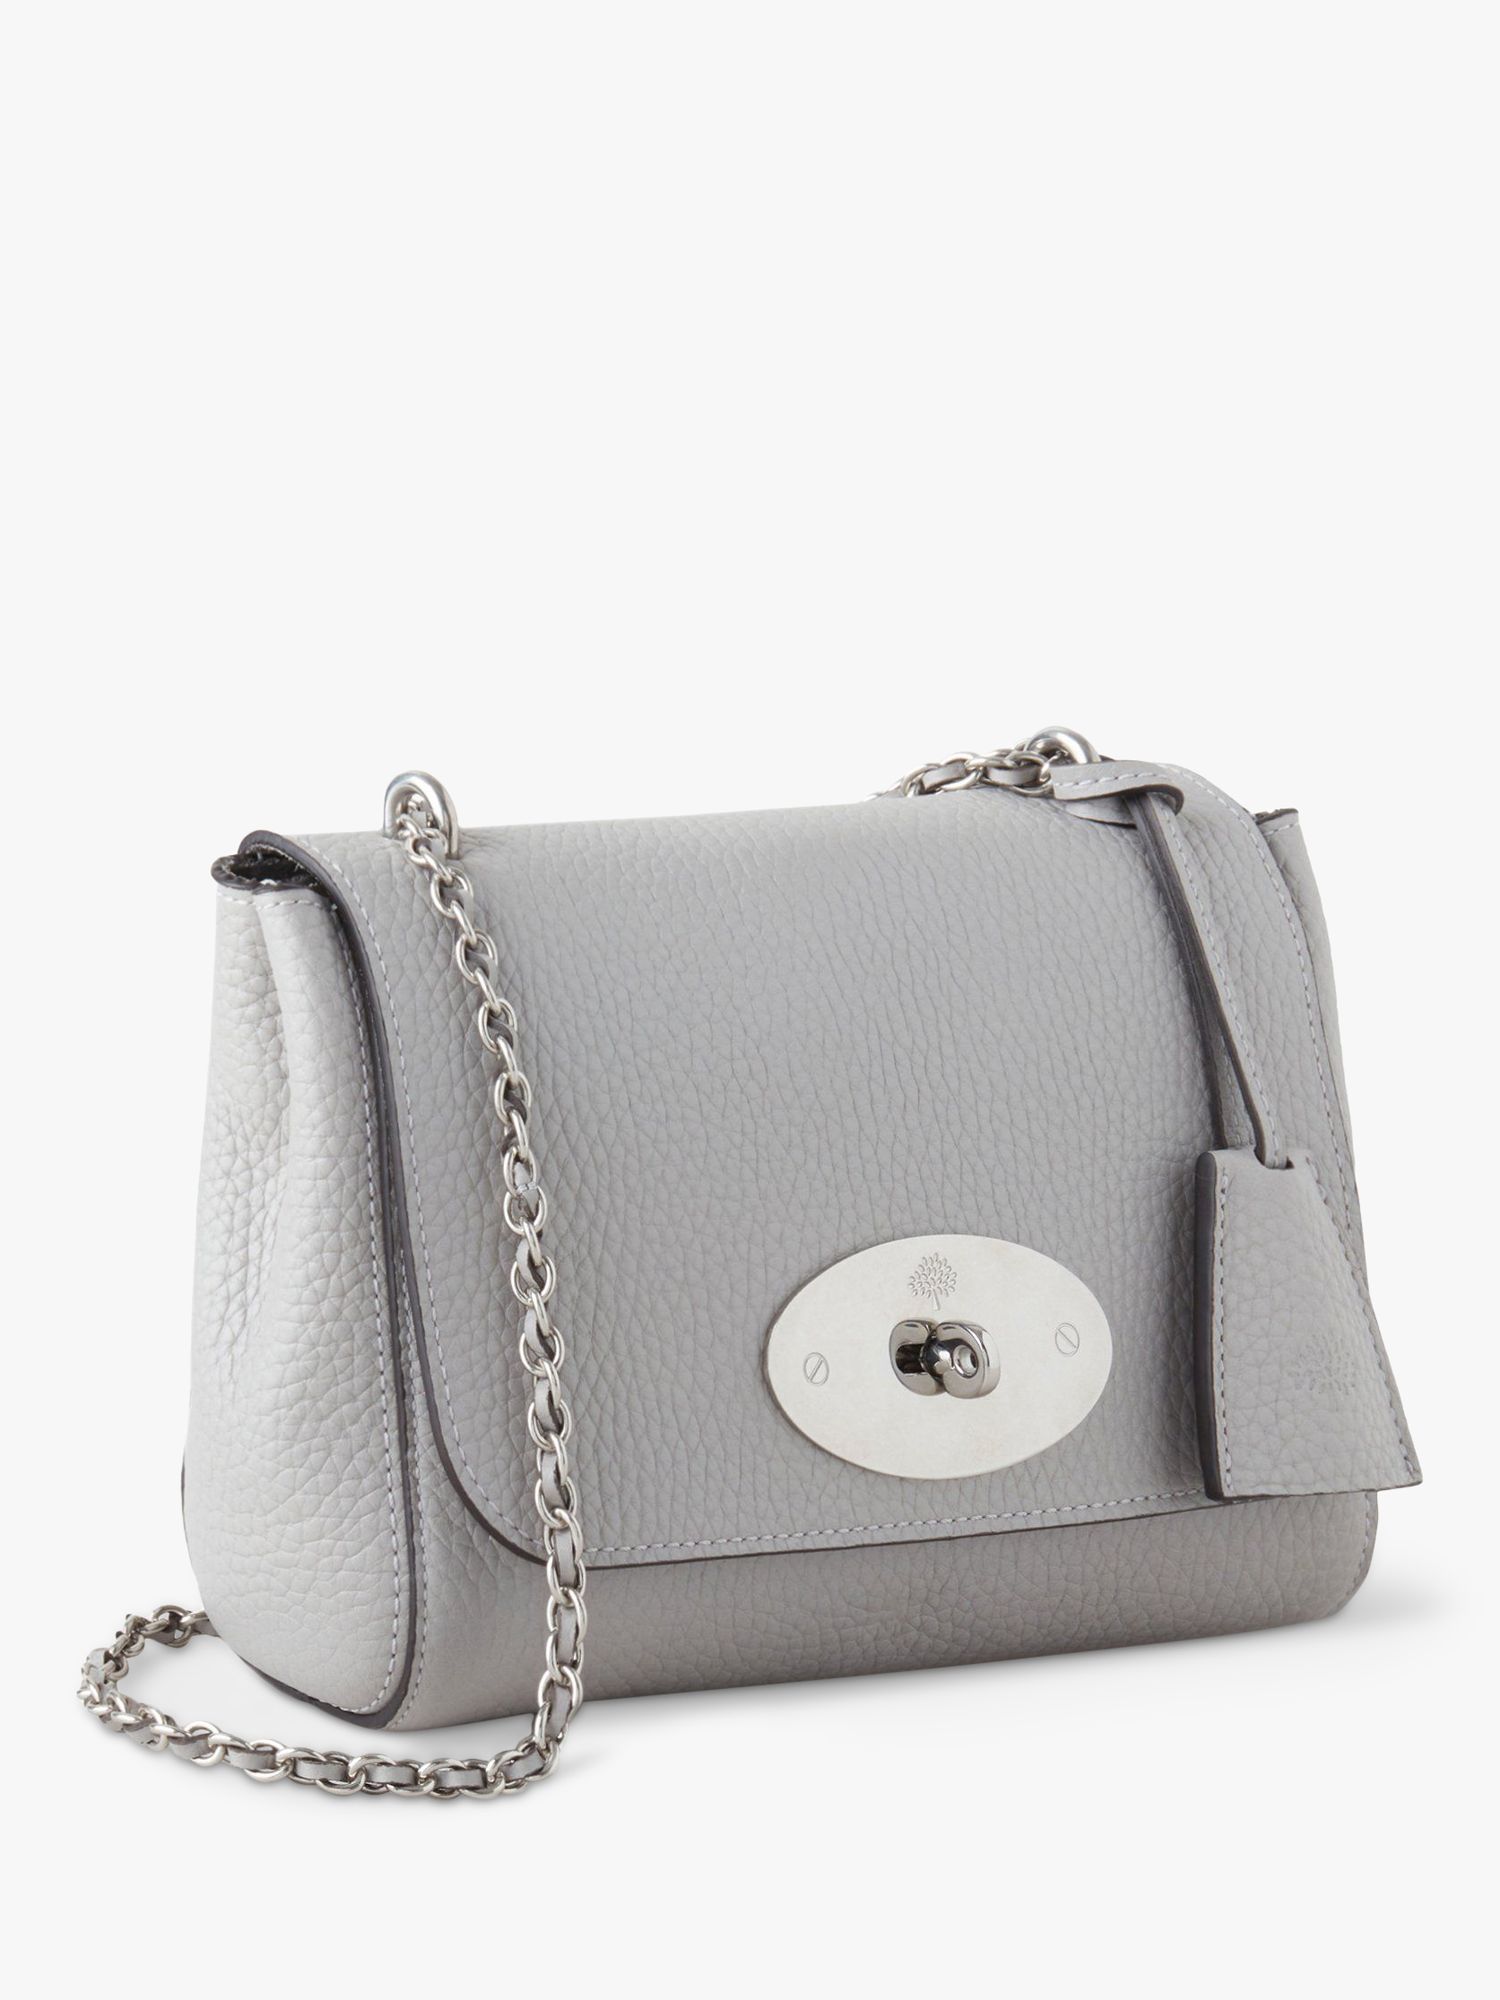 Mulberry Lily Heavy Grain Leather Shoulder Bag, Pale Grey at John Lewis ...